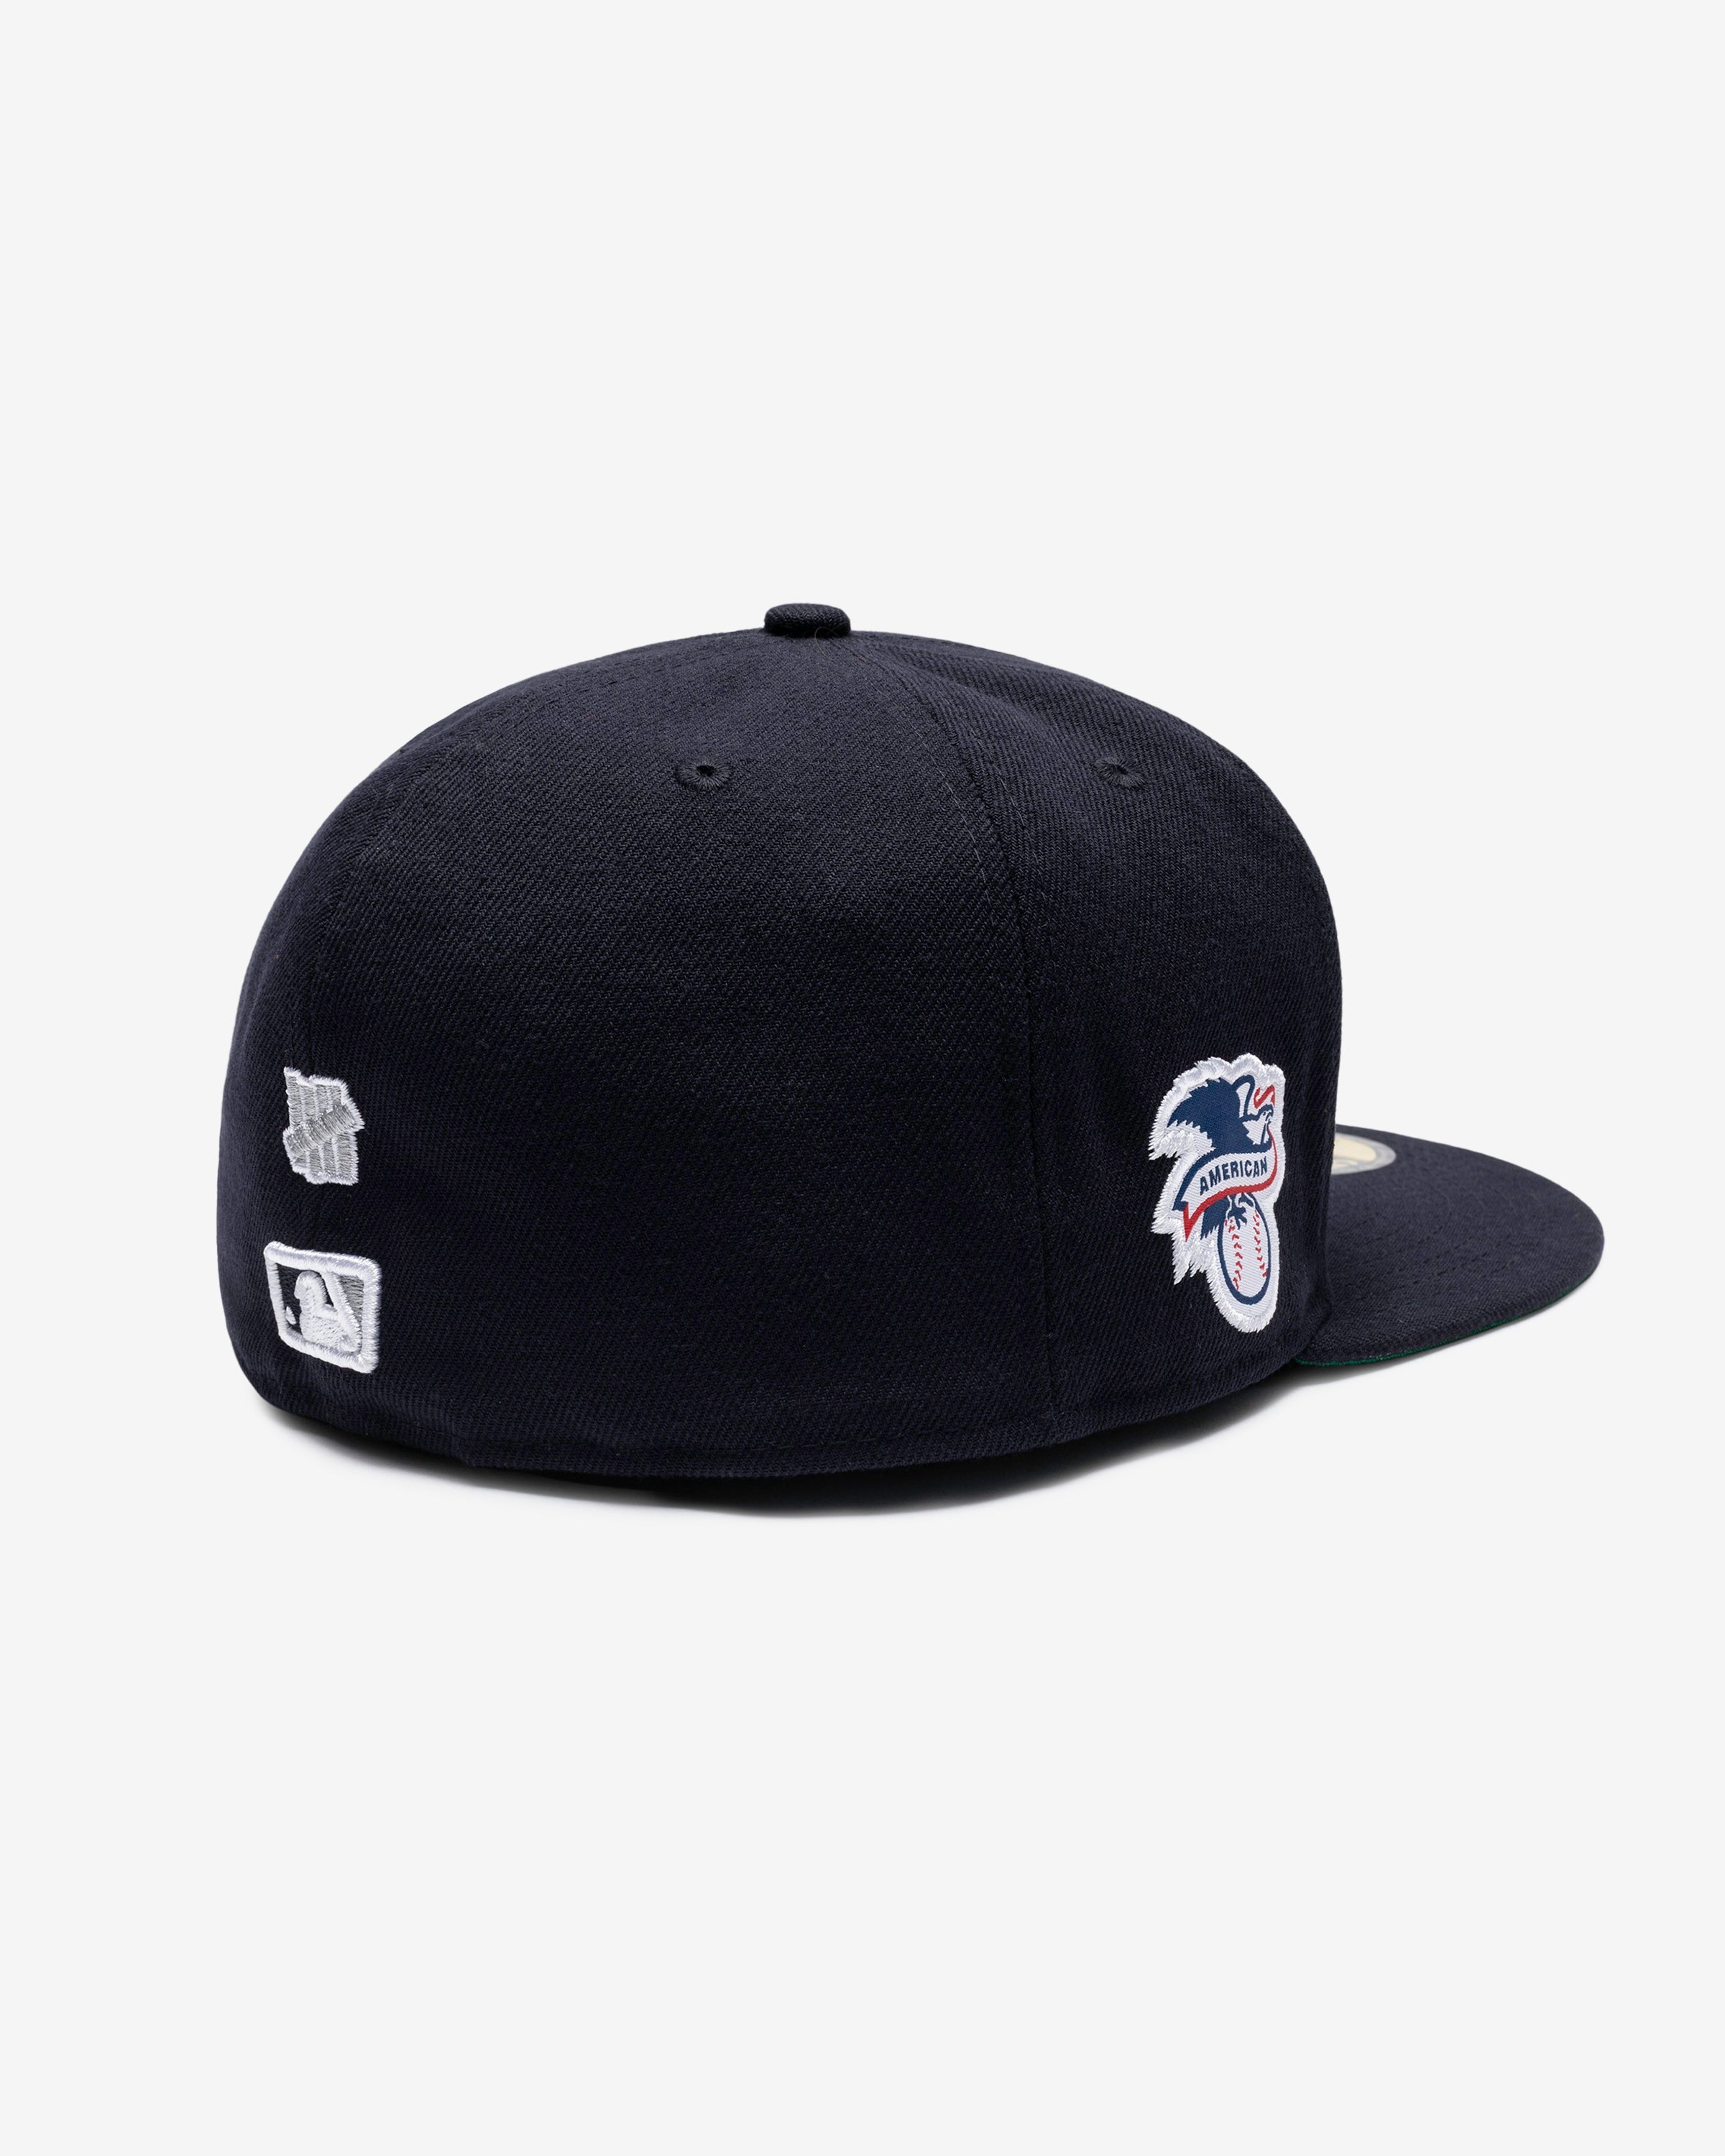 UNDEFEATED X NE X MLB FITTED - NEW YORK YANKEES – Undefeated